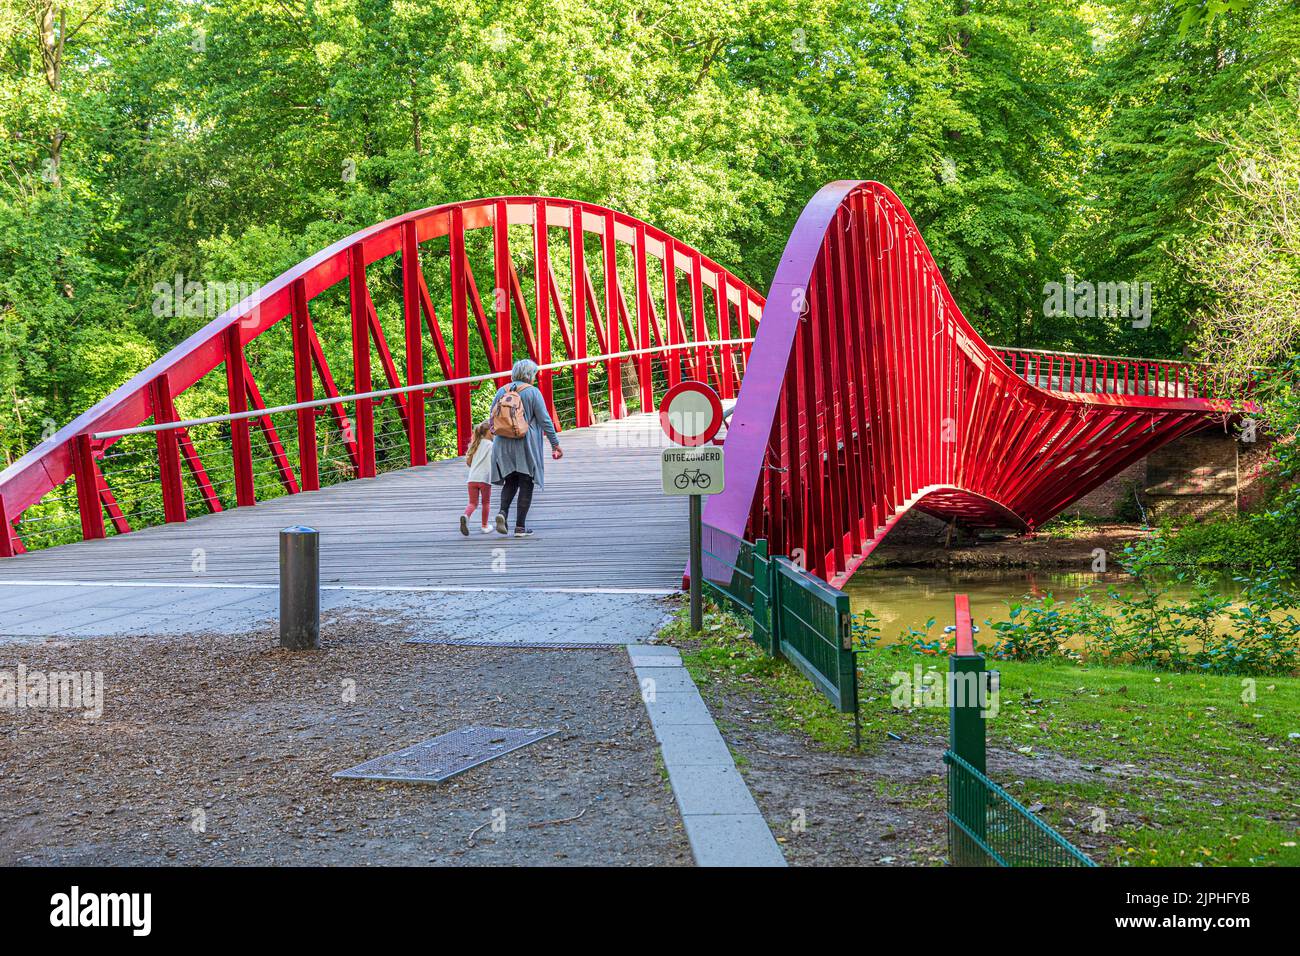 The Barge Bridge (Bargebrug) connecting Minnewater Park with the outskirts of the city of Bruges, Belgium Stock Photo